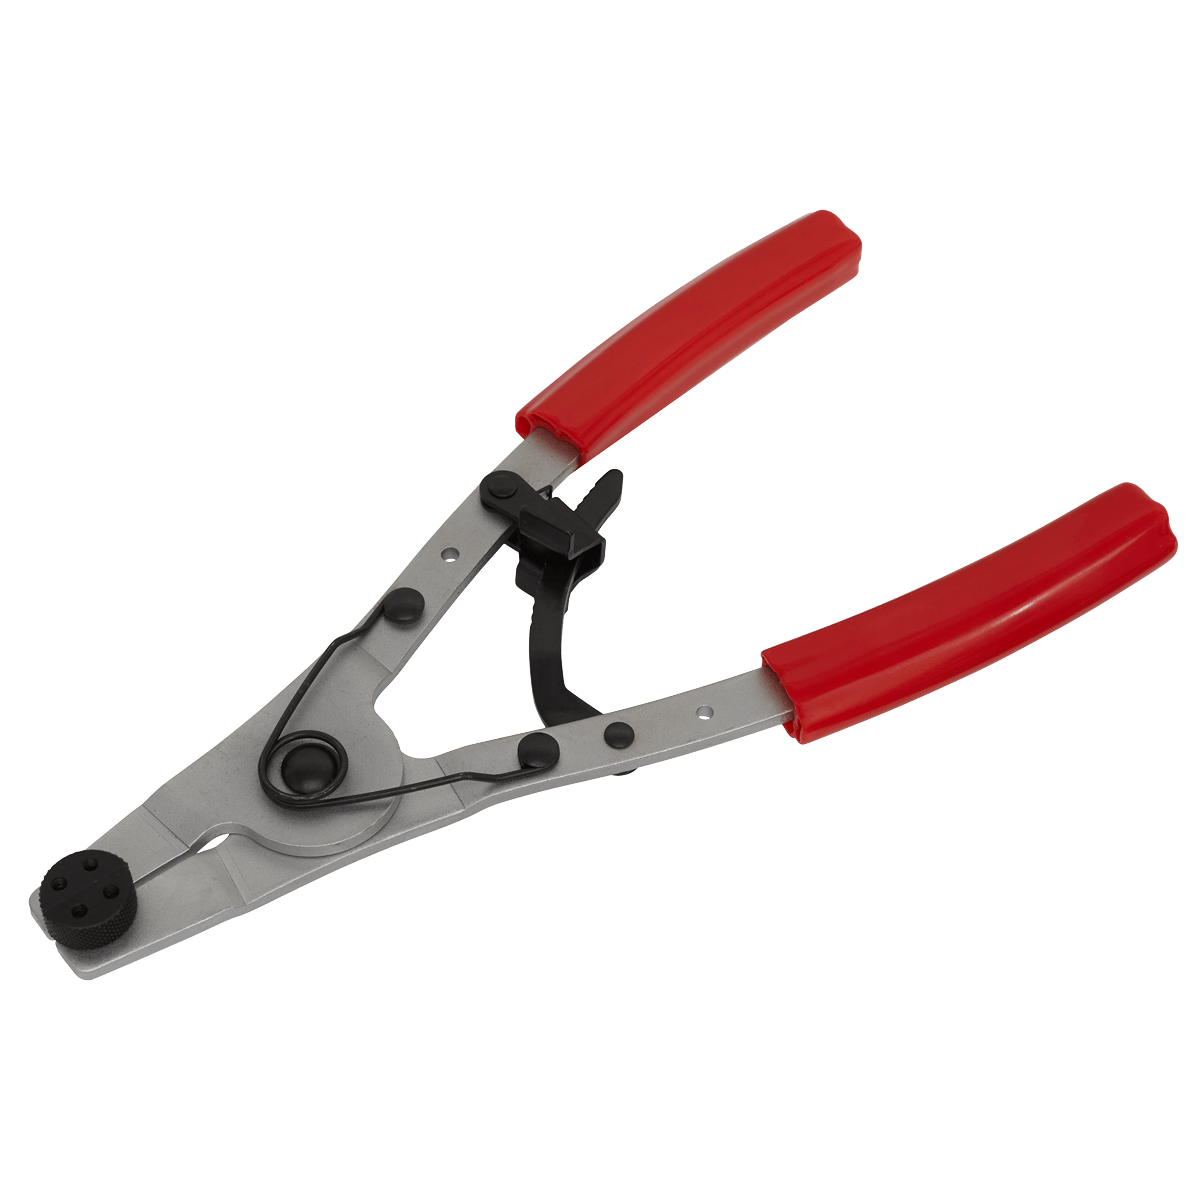 Ratchet Pliers Motorcycle Brake Piston Removal - Newmarket Motorcycle Company 